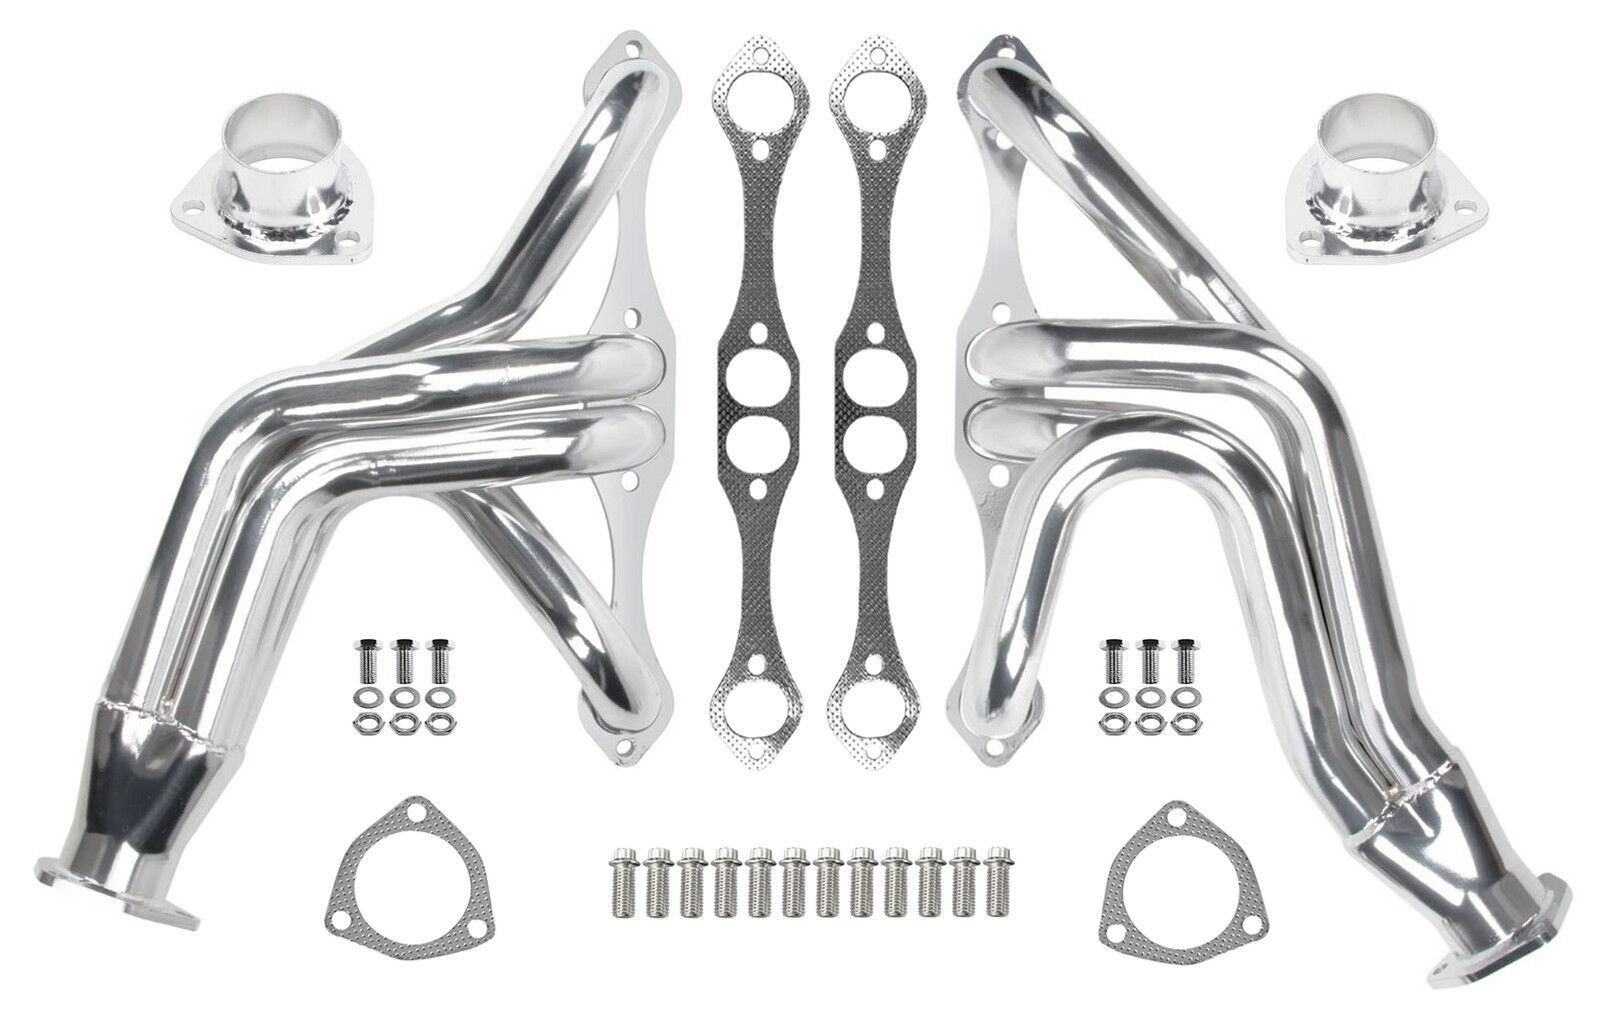 NEW 55-57 CHEVY,55-82 CORVETTE CHASSIS HEADERS,SBC 262-400,POLISHED STAINLESS